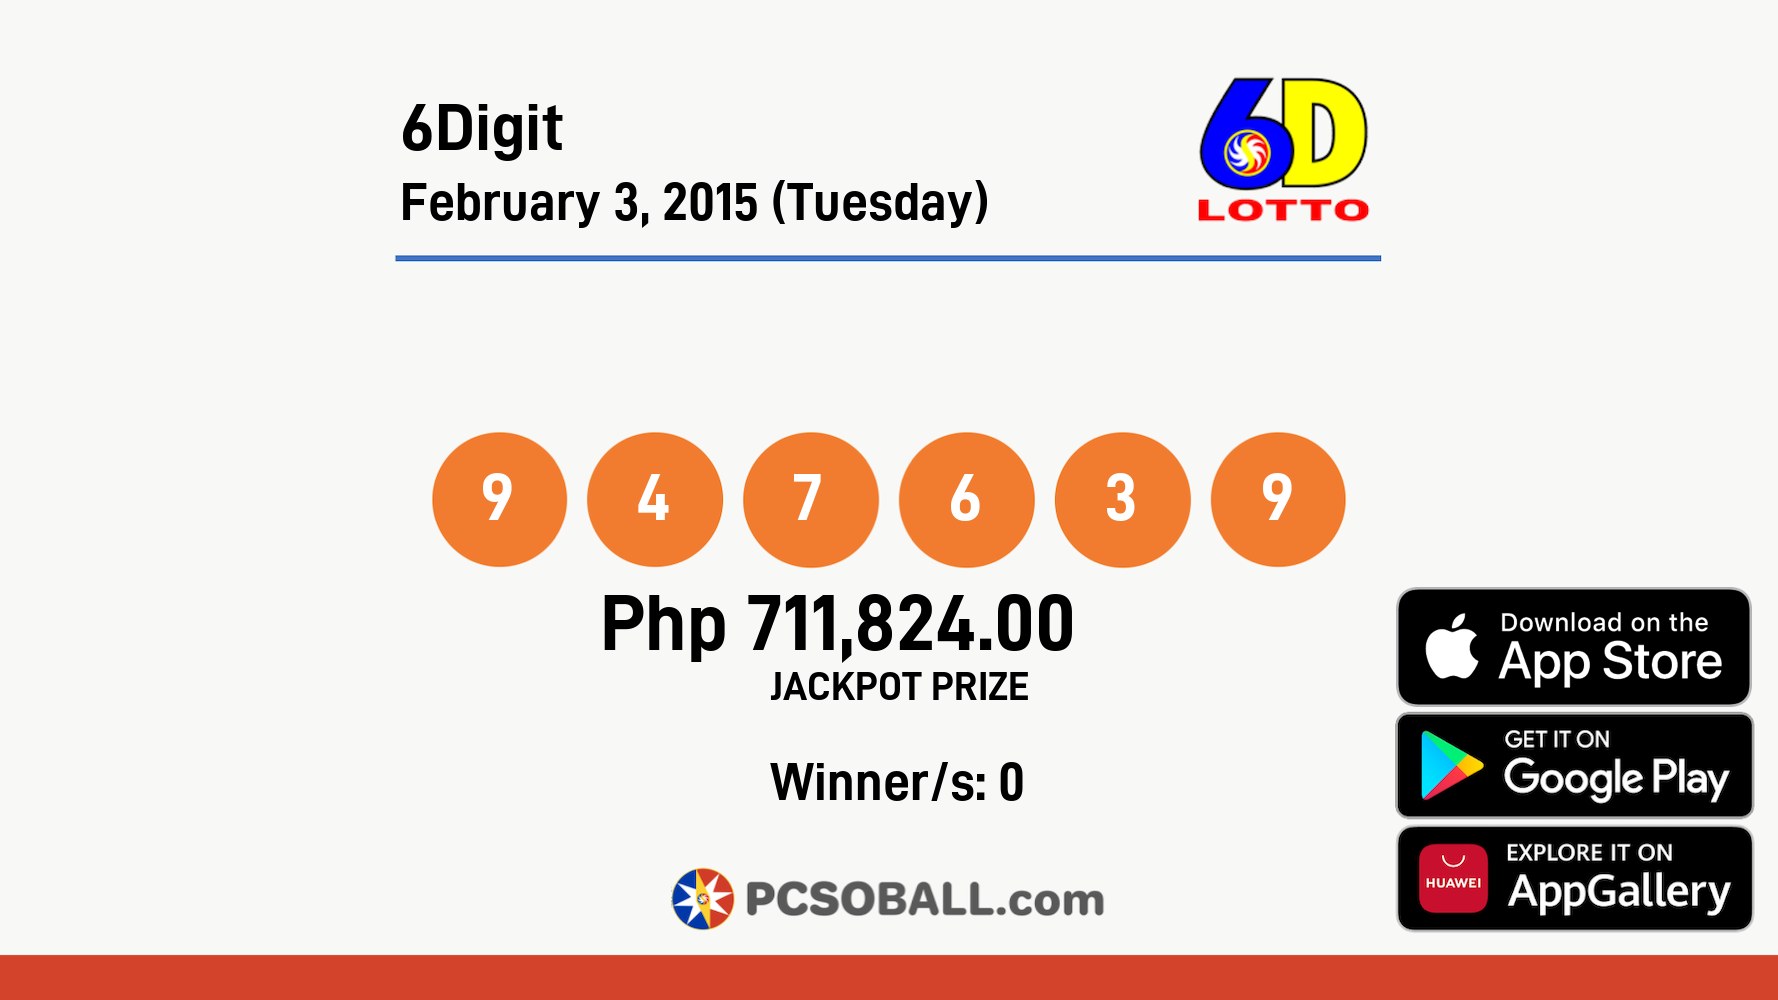 6Digit February 3, 2015 (Tuesday) Result